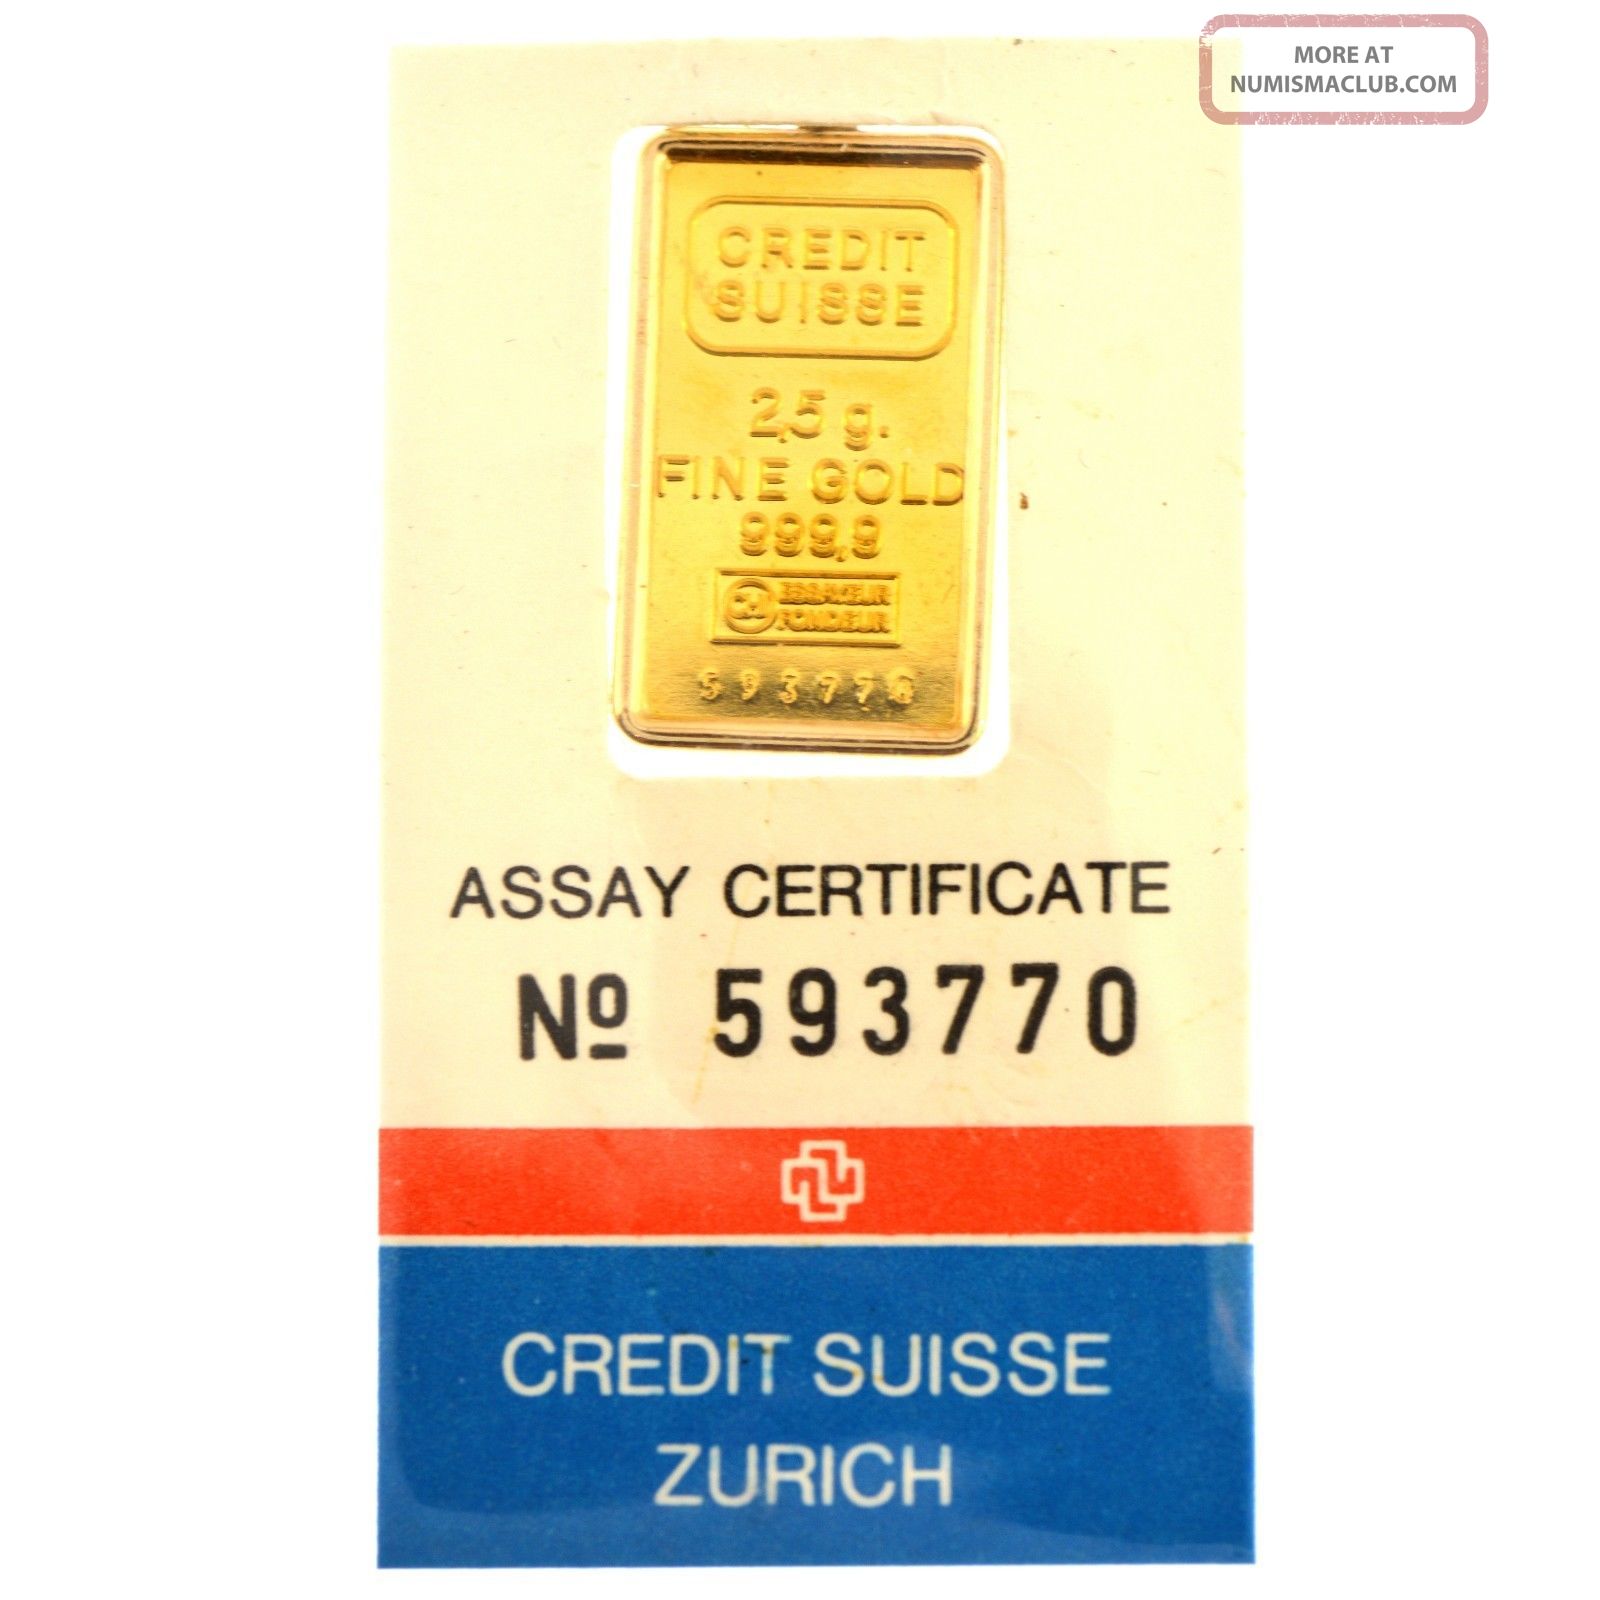 2. 5 Grams Fine Gold 999. 9 Credit Suisse Bar Pendant With Certificate